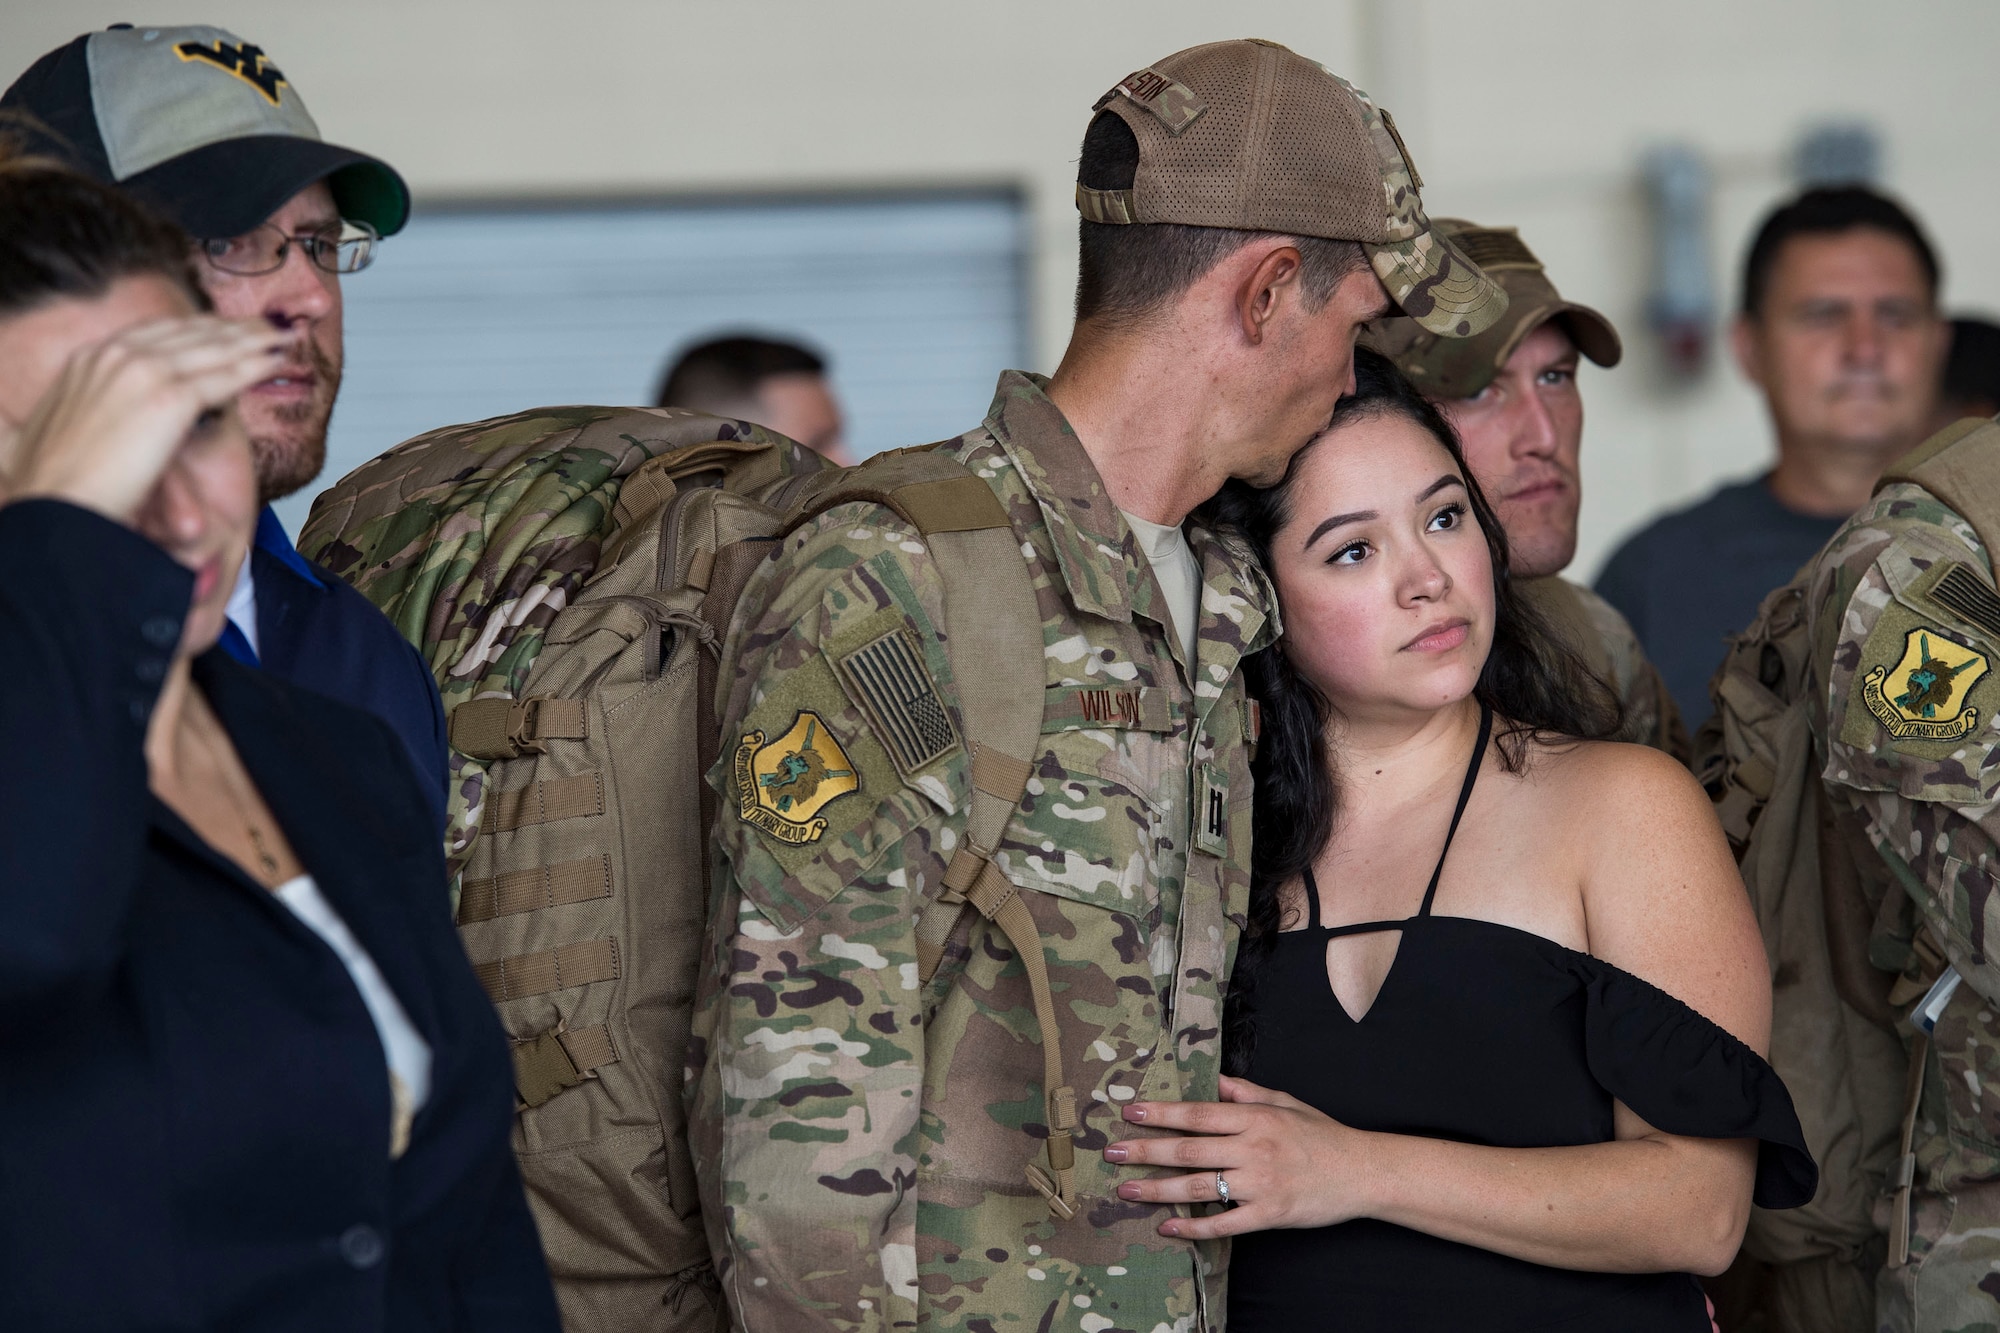 Capt. Justin Wilson 823d Base Defense Squadron (BDS), embraces a loved one during a redeployment, Oct. 26, 2017, at Moody Air Force Base, Ga. The 822d, 823d and 824th BDS’s provide high-risk force protection and integrated base defense for expeditionary air forces. Airmen from the 823d BDS just returned home from conducting relief-in-place in the United States Africa Command theater while Airmen from the 824th BDS took their place. (U.S. Air Force photo by Senior Airman Janiqua P. Robinson)